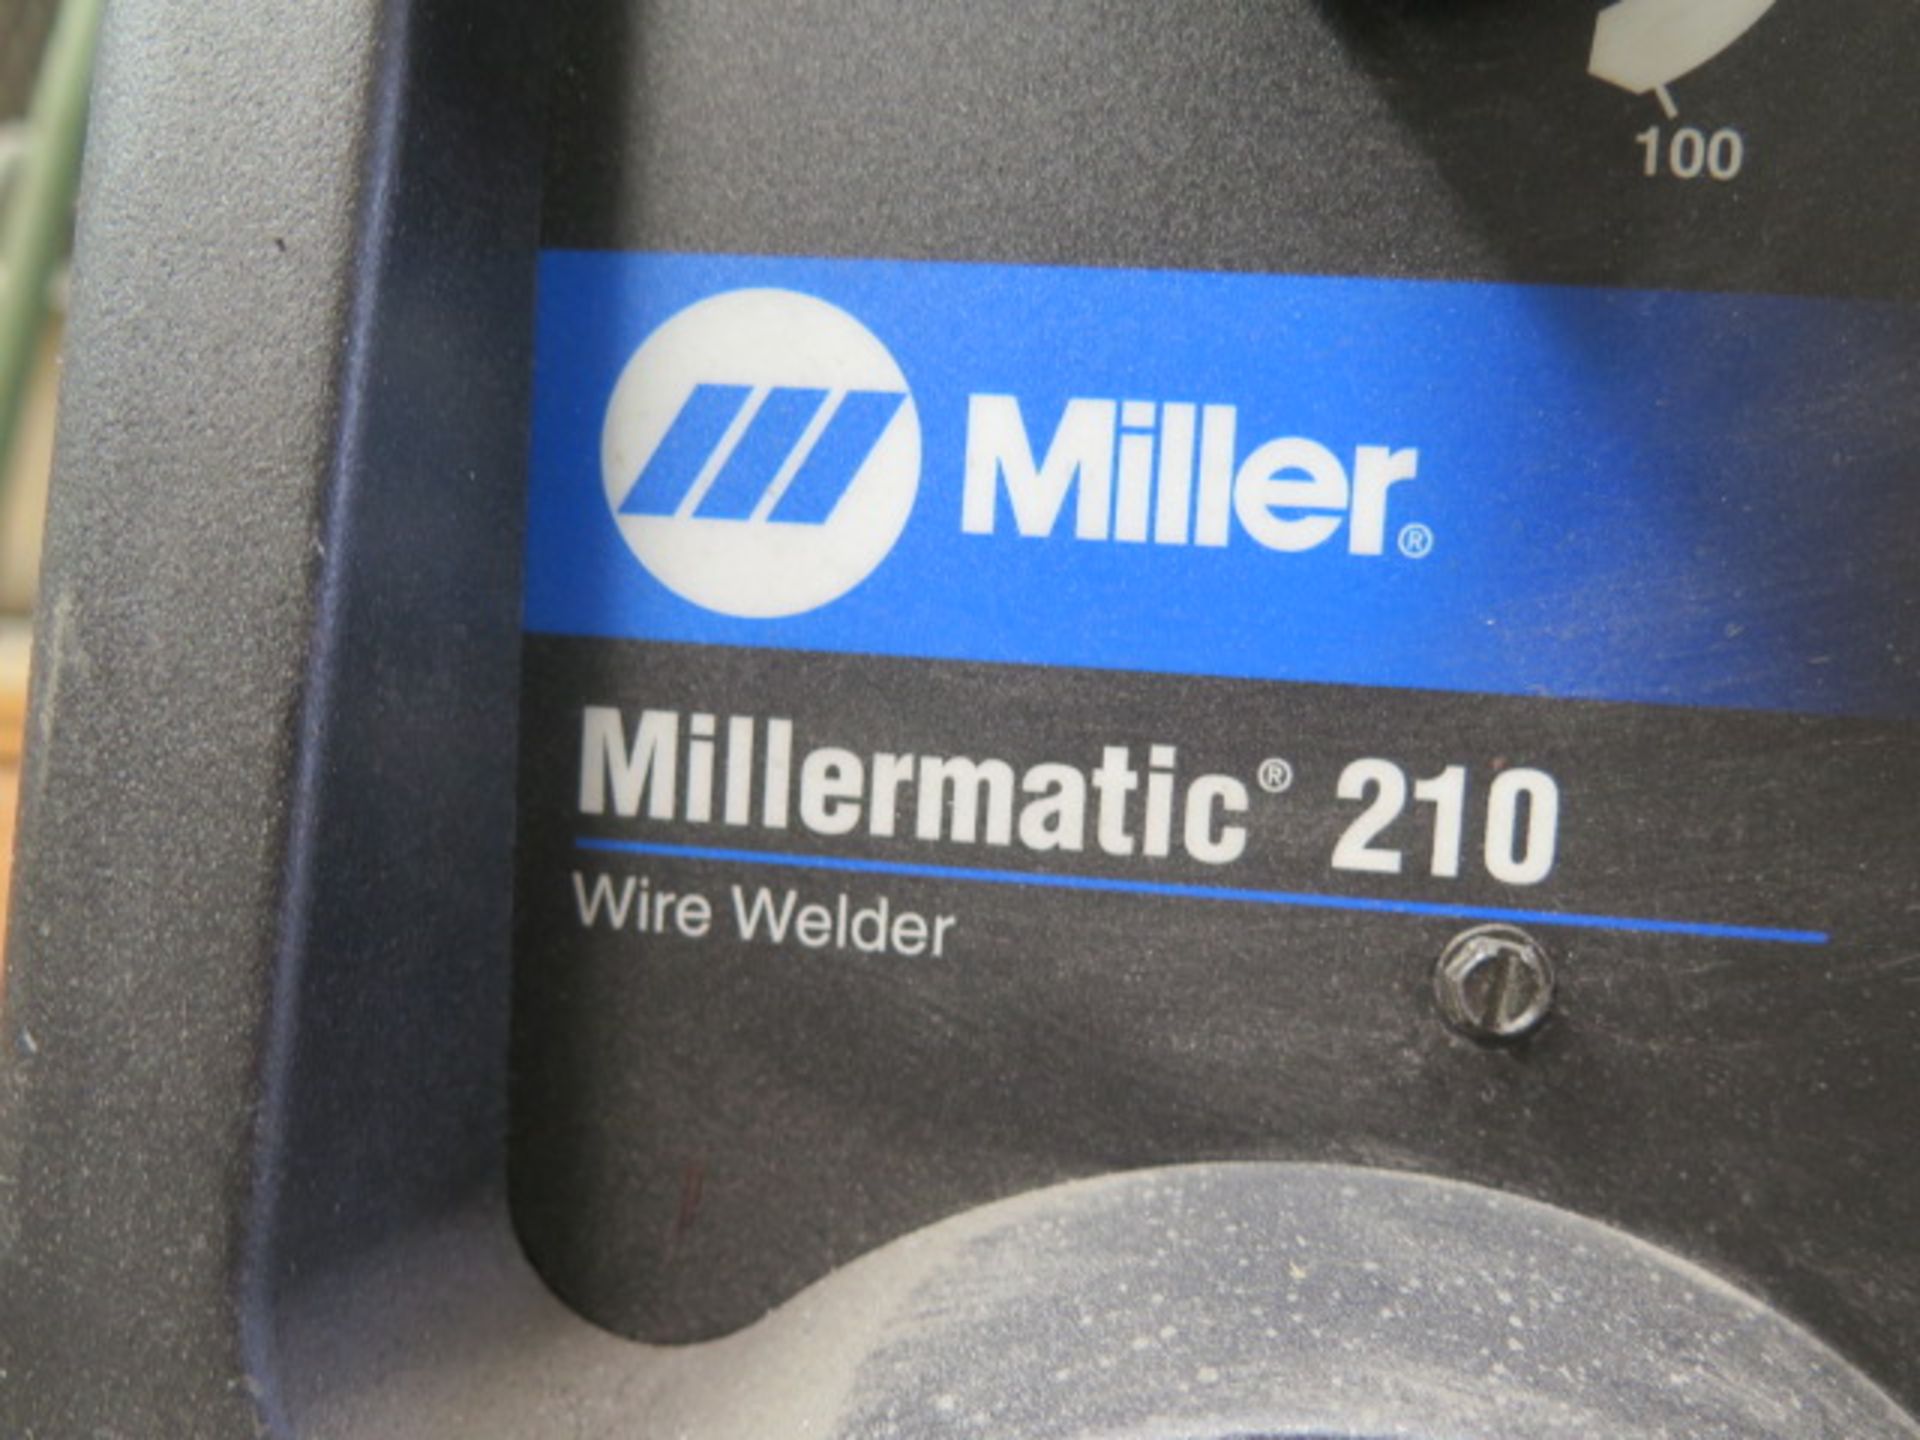 Miller Millermatic 200 Wire Welder s/n LF085483, SOLD AS IS AND NO WARRANTY - Image 5 of 5